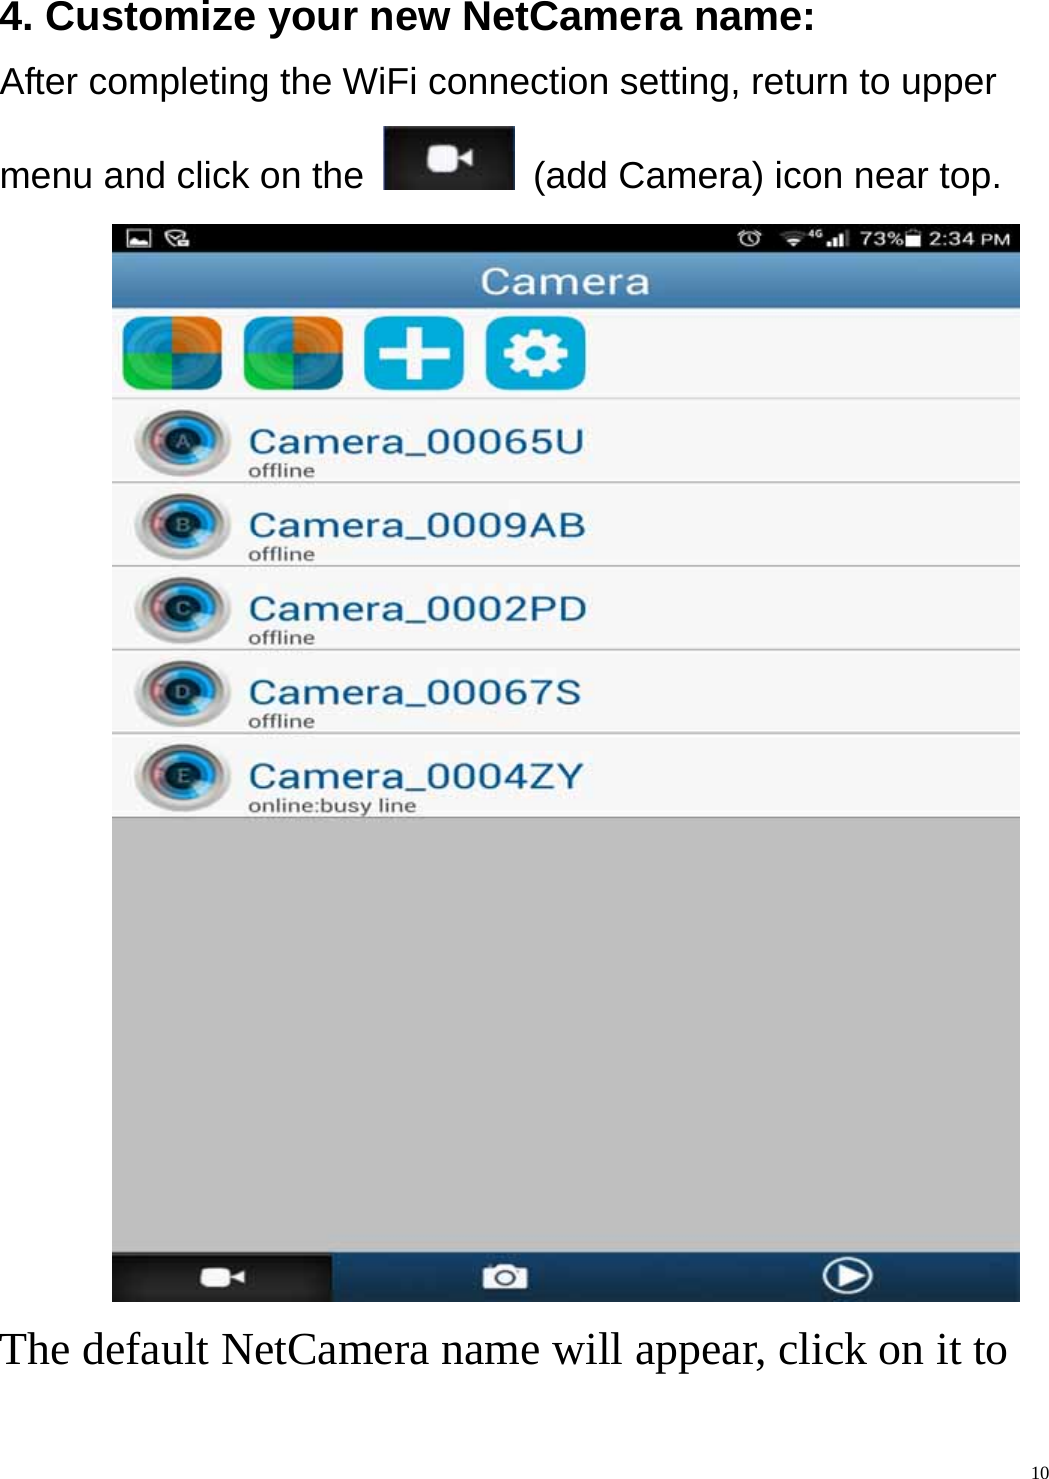    104. Customize your new NetCamera name: After completing the WiFi connection setting, return to upper menu and click on the    (add Camera) icon near top.             The default NetCamera name will appear, click on it to 